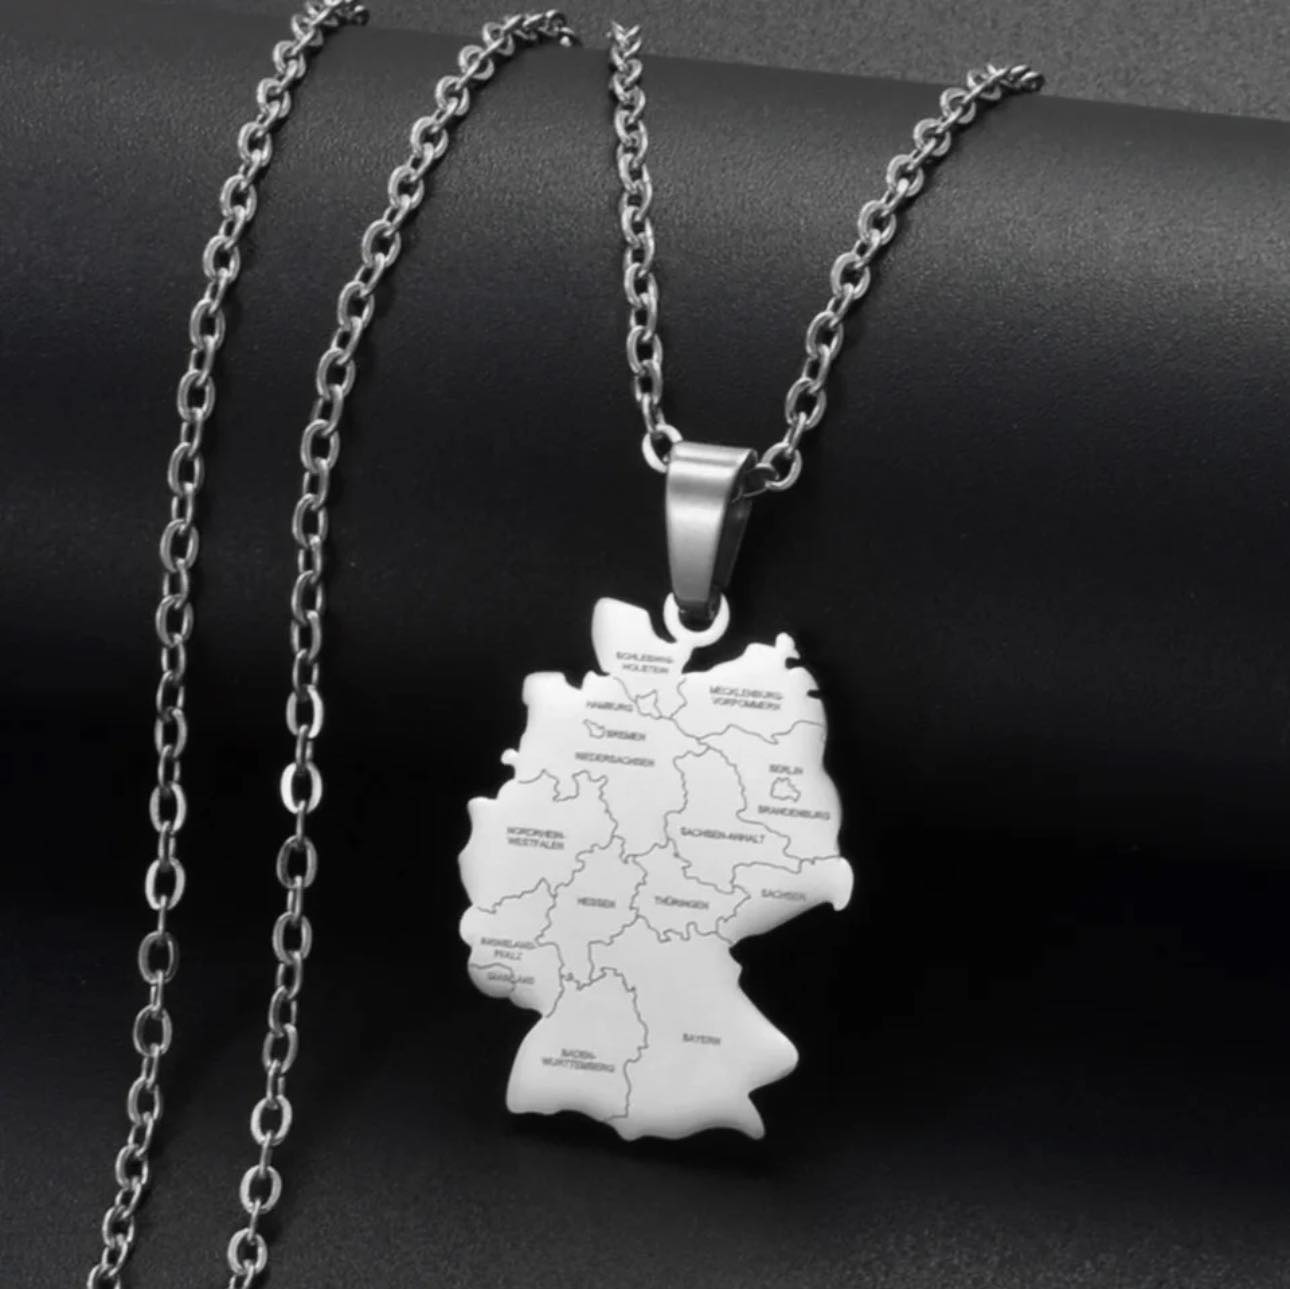 Germany Map & Cities Necklace